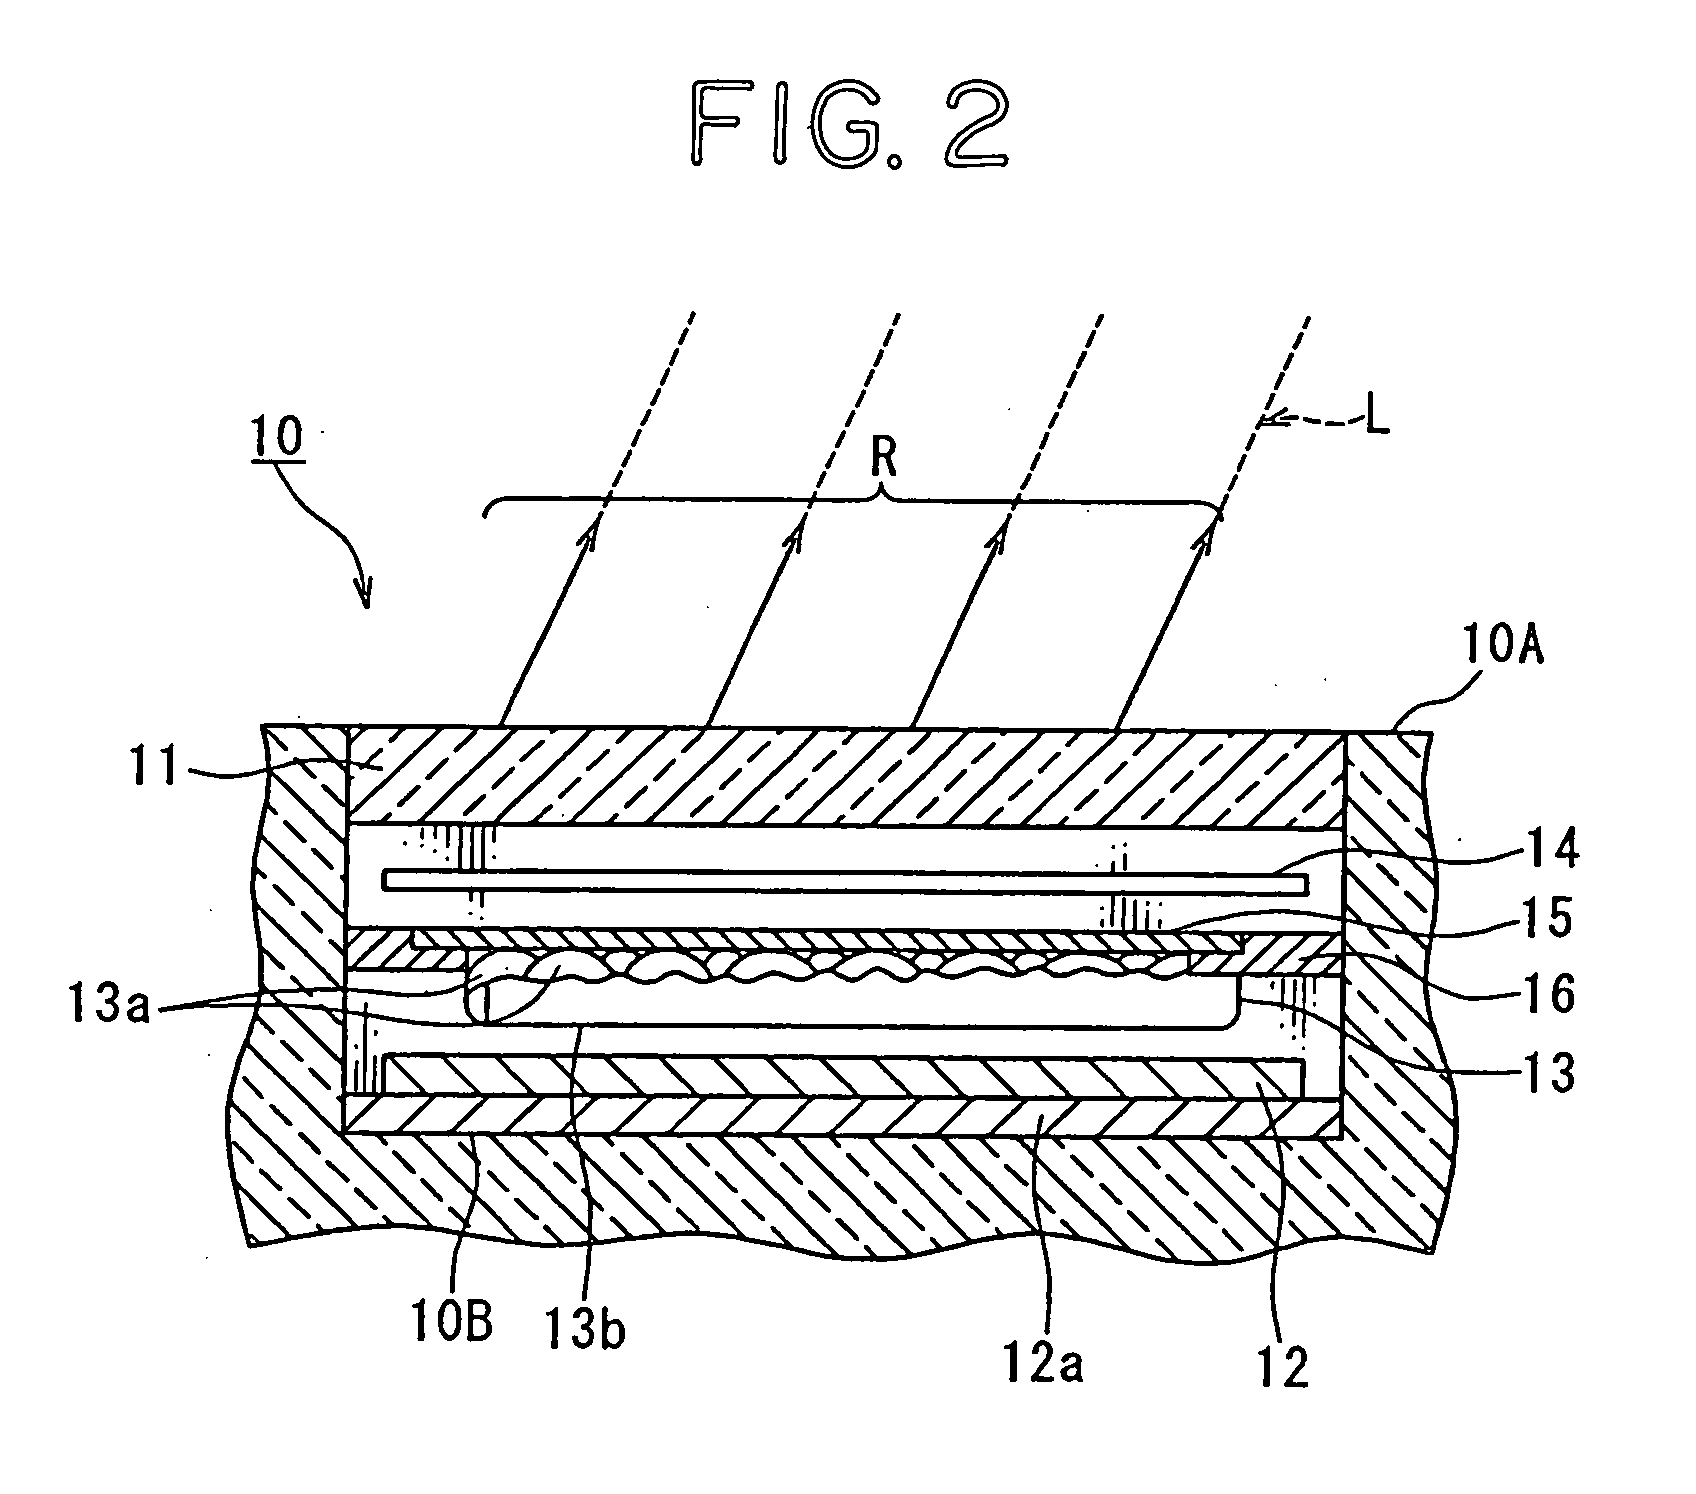 Display system for vehicle